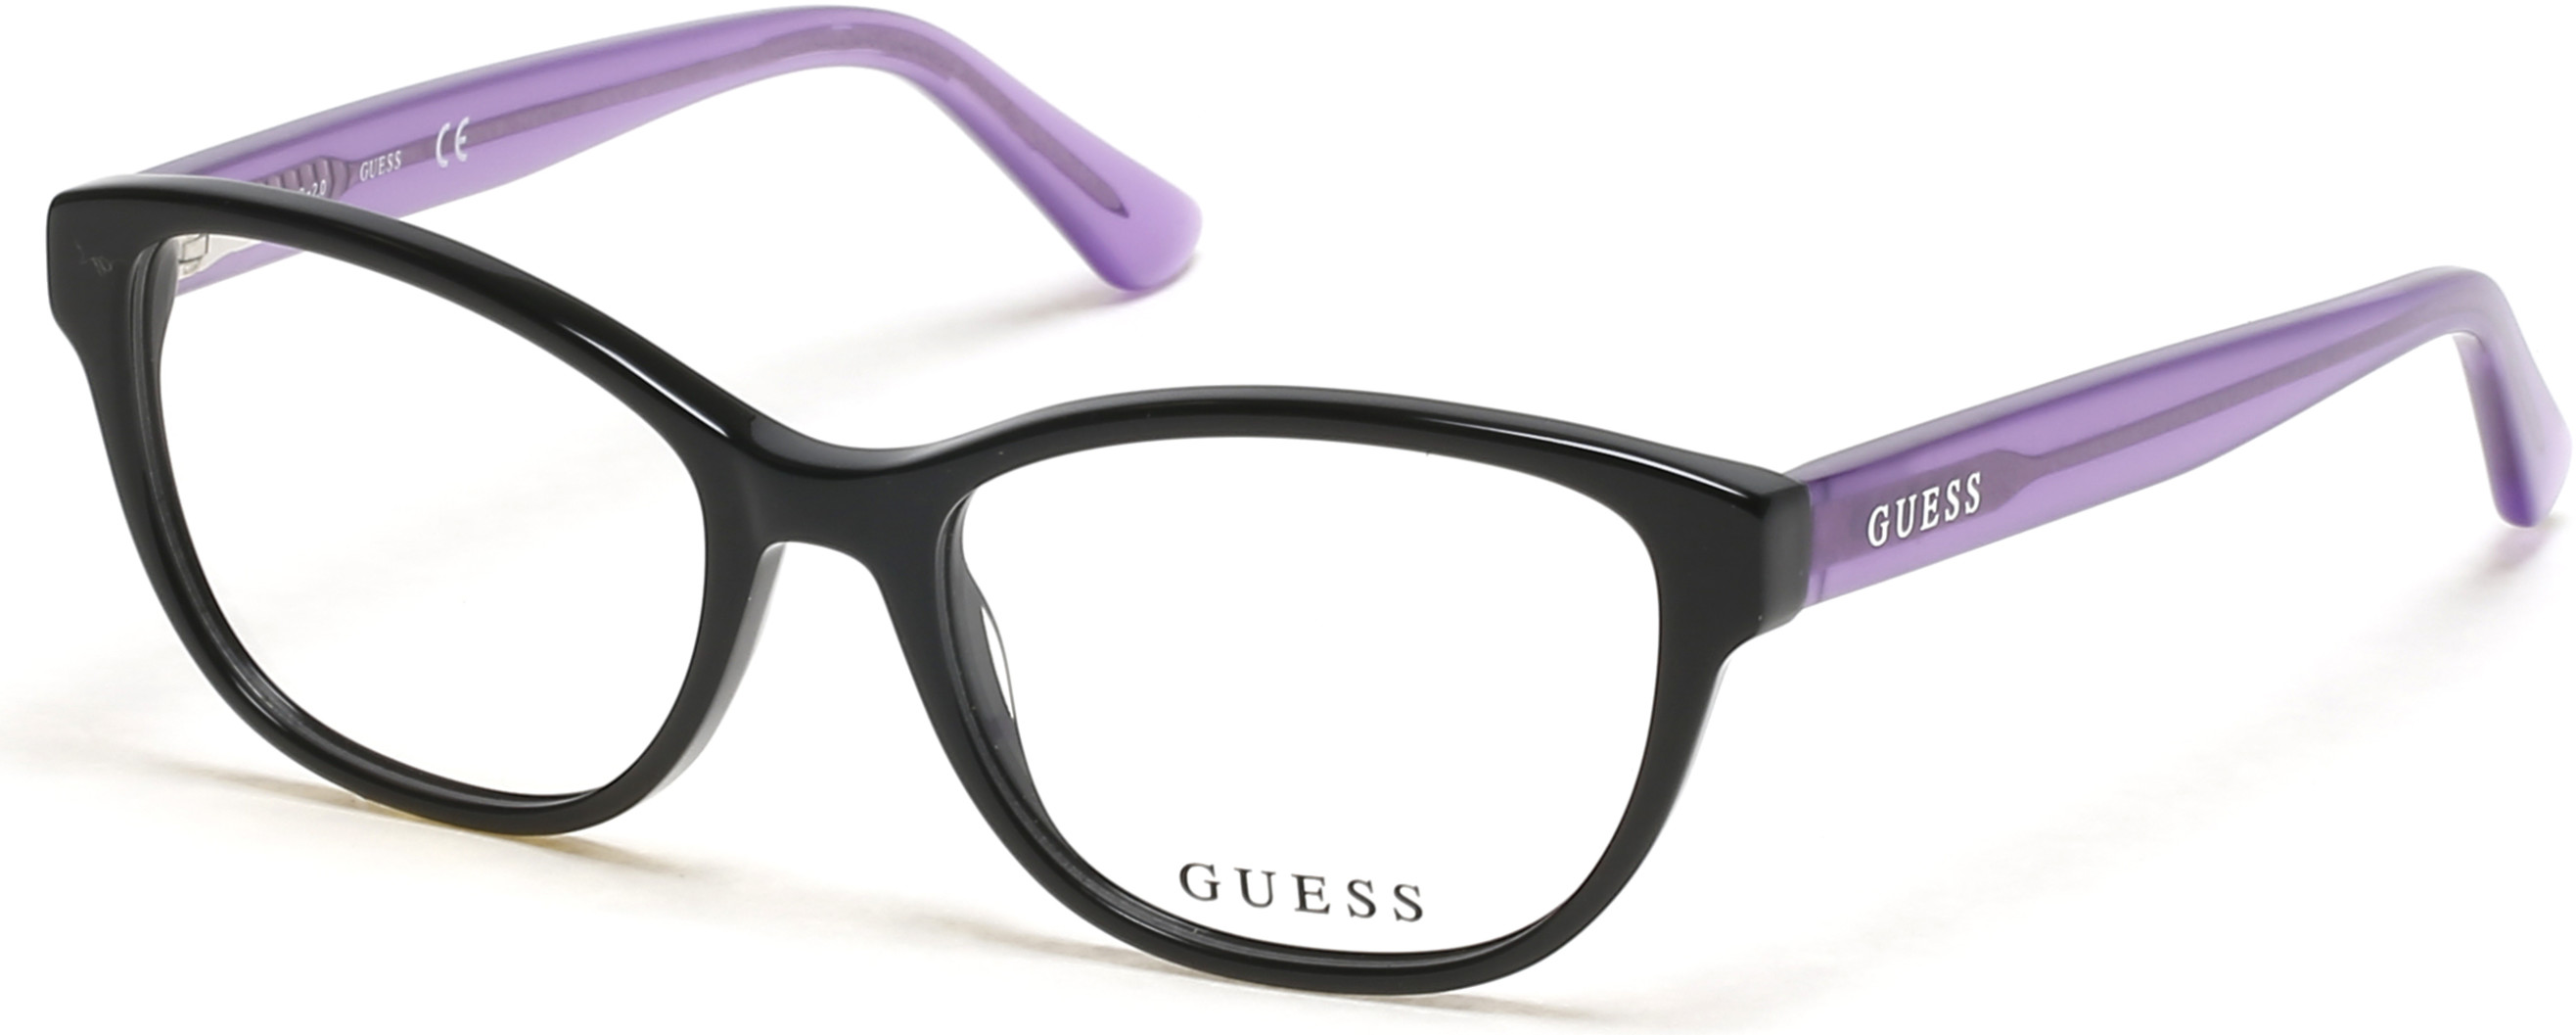 GUESS 9203 001